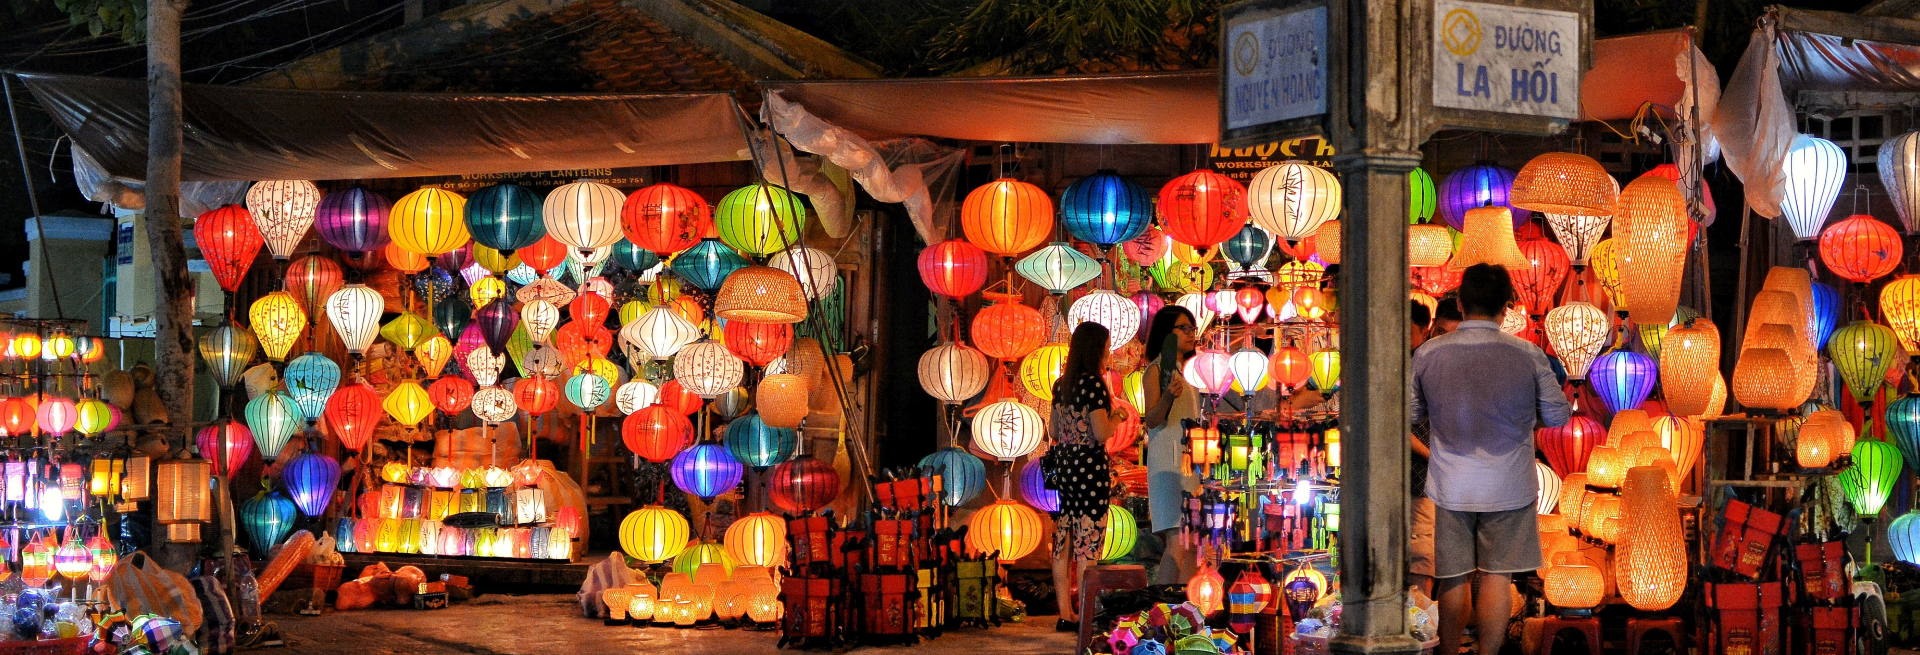 Hoi An lanterns – the symbol of Hoi An in central Vietnam